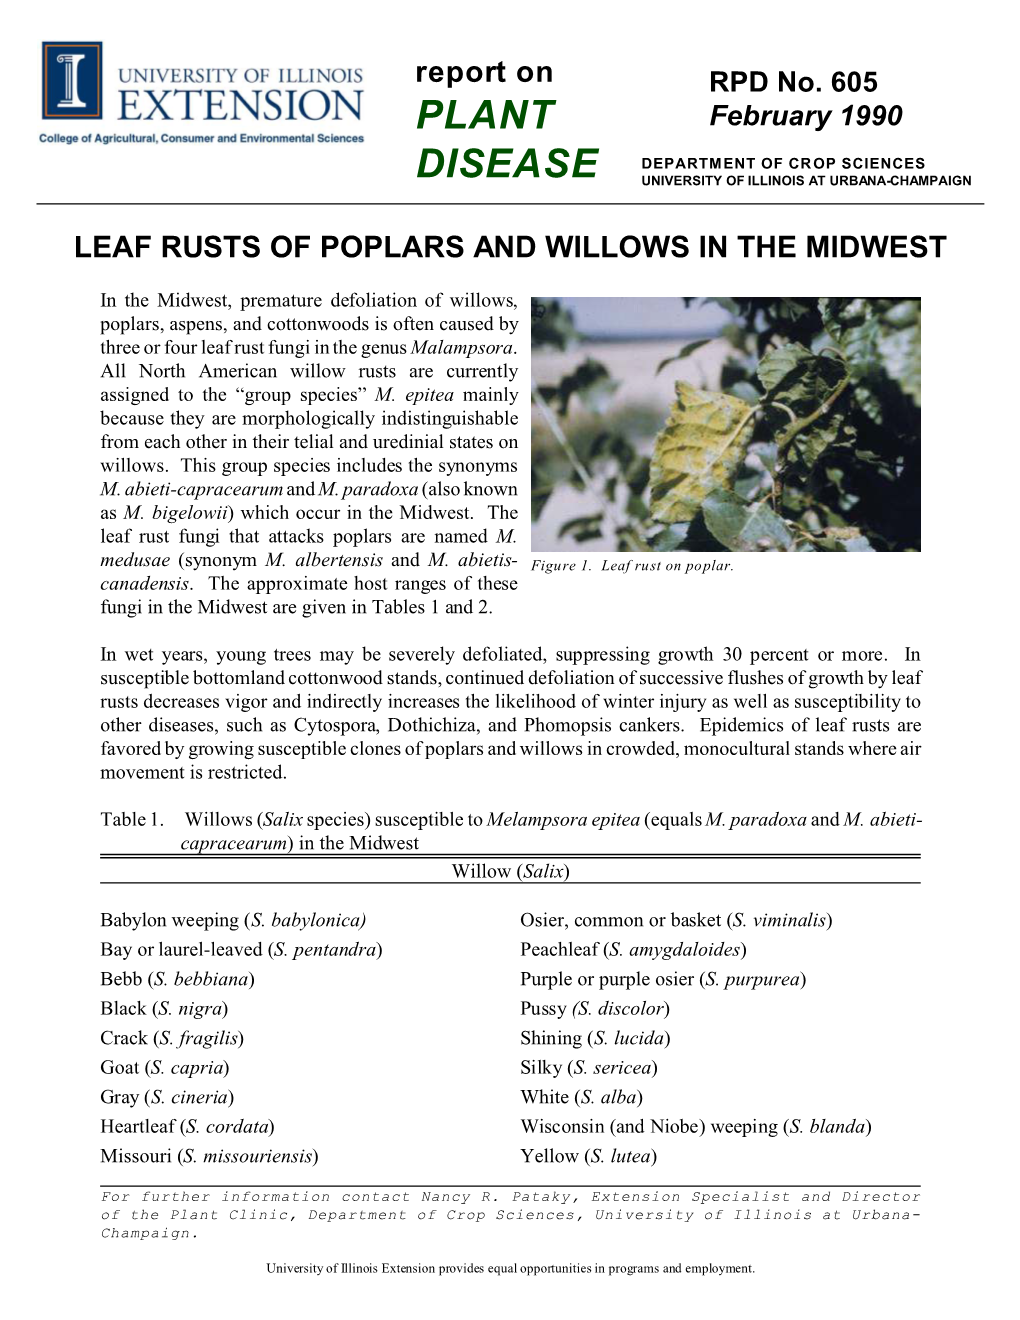 Leaf Rusts of Poplars and Willows in the Midwest